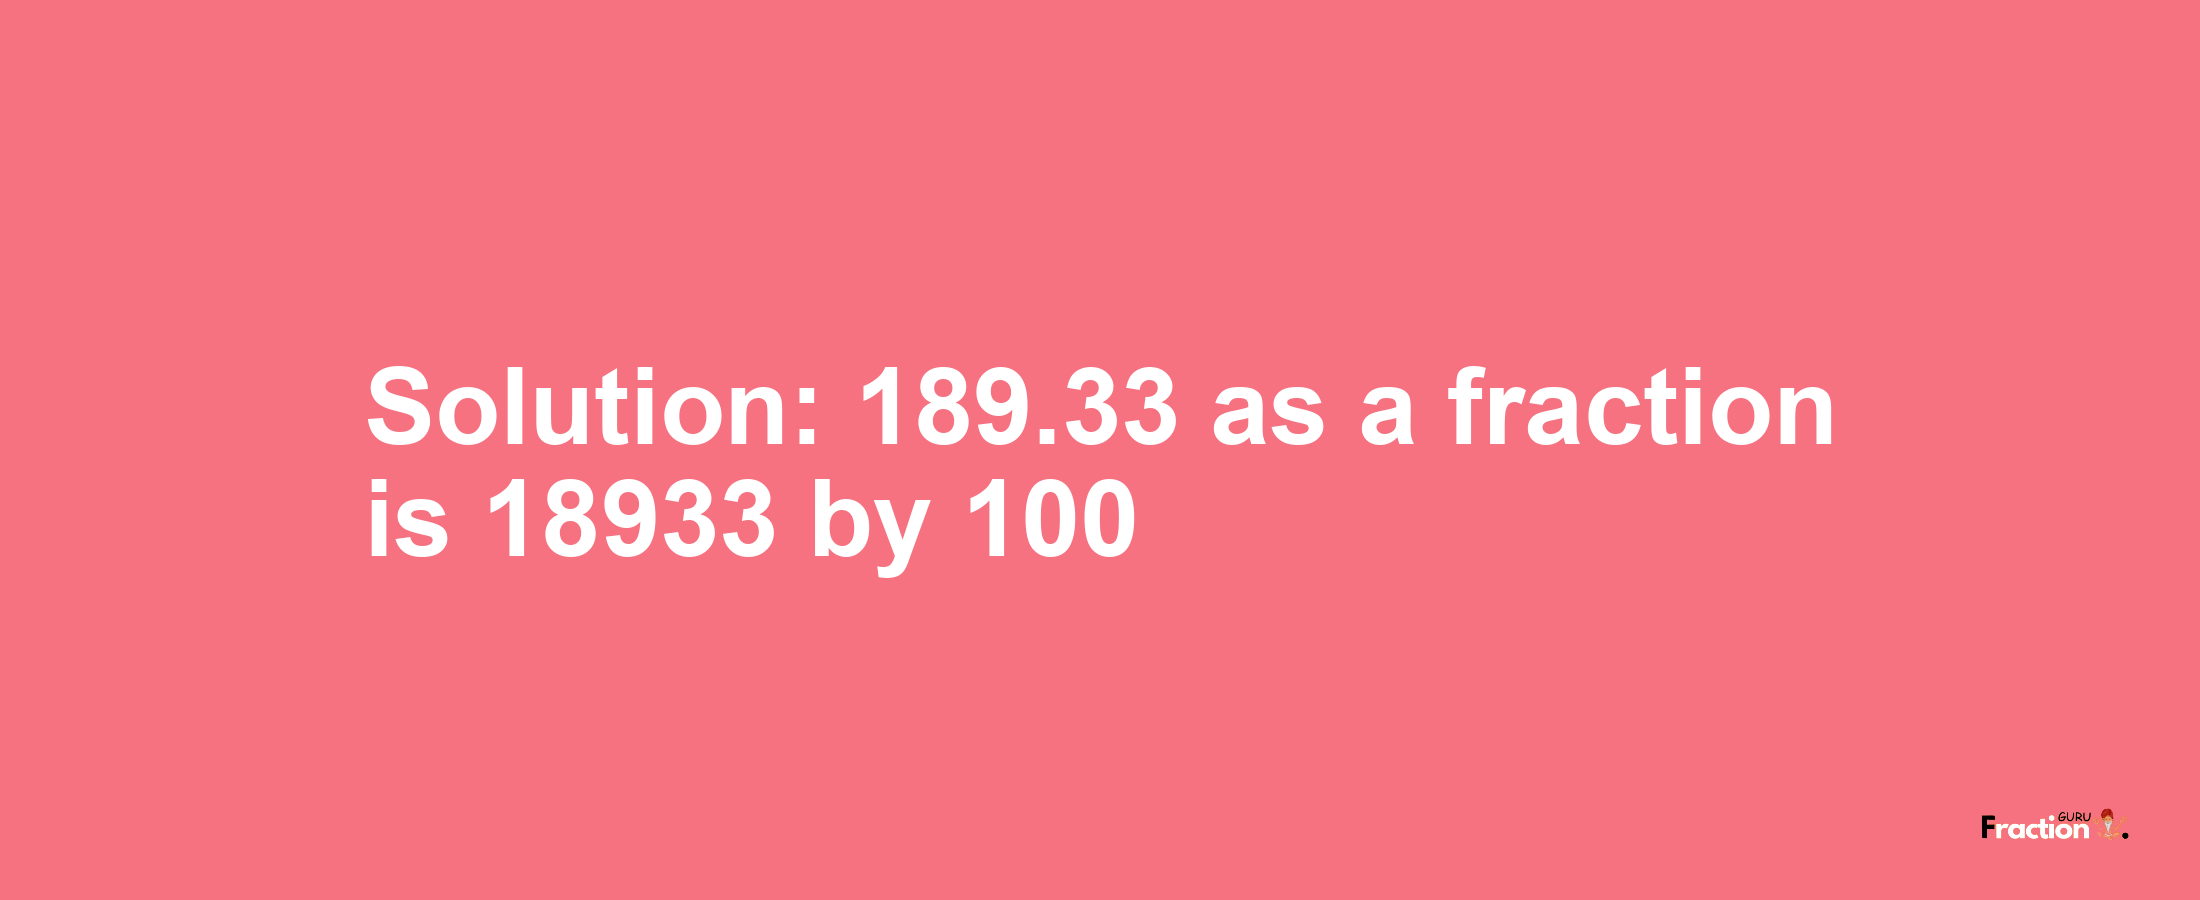 Solution:189.33 as a fraction is 18933/100